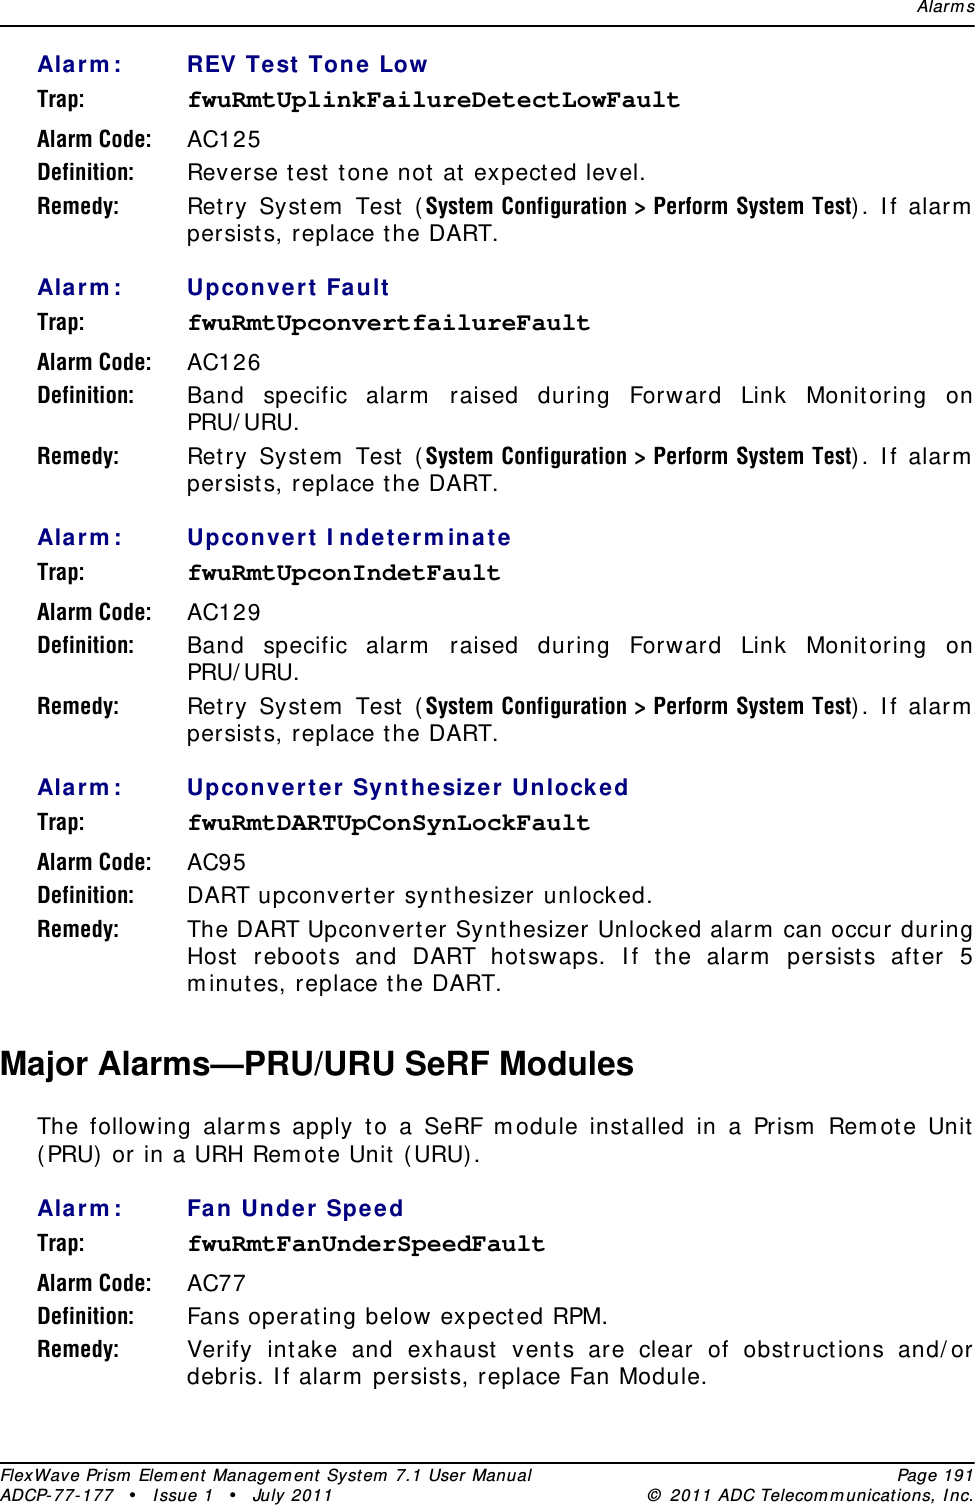 Alar m sFlexWave Prism  Elem ent Managem ent  Syst em  7.1 User Manual Page 191ADCP- 77- 177  • I ssue 1 • July 2011 ©  2011 ADC Telecom m unicat ions, I nc.Ala rm : REV Test  Ton e LowTrap: fwuRmtUplinkFailureDetectLowFaultAlarm Code: AC125Definition: Reverse test t one not at  expect ed level.Remedy: Ret ry Syst em  Test ( System Configuration &gt; Perform System Test) . I f alarm  persist s, replace the DART.Ala rm : Upconver t  FaultTrap: fwuRmtUpconvertfailureFaultAlarm Code: AC126Definition: Band specific alarm  raised during Forward Link Monit oring on PRU/ URU.Remedy: Ret ry Syst em  Test ( System Configuration &gt; Perform System Test) . I f alarm  persist s, replace the DART.Ala rm : Upconve rt I nde t erm inat eTrap: fwuRmtUpconIndetFaultAlarm Code: AC129Definition: Band specific alarm  raised during Forward Link Monit oring on PRU/ URU.Remedy: Ret ry Syst em  Test ( System Configuration &gt; Perform System Test) . I f alarm  persist s, replace the DART.Ala rm : Upconver t er Synt hesize r UnlockedTrap: fwuRmtDARTUpConSynLockFaultAlarm Code: AC95Definition: DART upconvert er synt hesizer unlocked.Remedy: The DART Upconvert er Synt hesizer Unlocked alarm  can occur during Host reboot s and DART hotswaps. I f the alarm  persists aft er 5 m inutes, replace the DART.Major Alarms—PRU/URU SeRF ModulesThe following alarm s apply to a SeRF m odule installed in a Prism  Rem ot e Unit  ( PRU)  or in a URH Rem ot e Unit  ( URU) .Ala rm : Fa n Under SpeedTrap: fwuRmtFanUnderSpeedFaultAlarm Code: AC77Definition: Fans operating below expect ed RPM.Remedy: Verify intake and exhaust vent s are clear of obst ruct ions and/ or debris. I f alarm  persists, replace Fan Module.